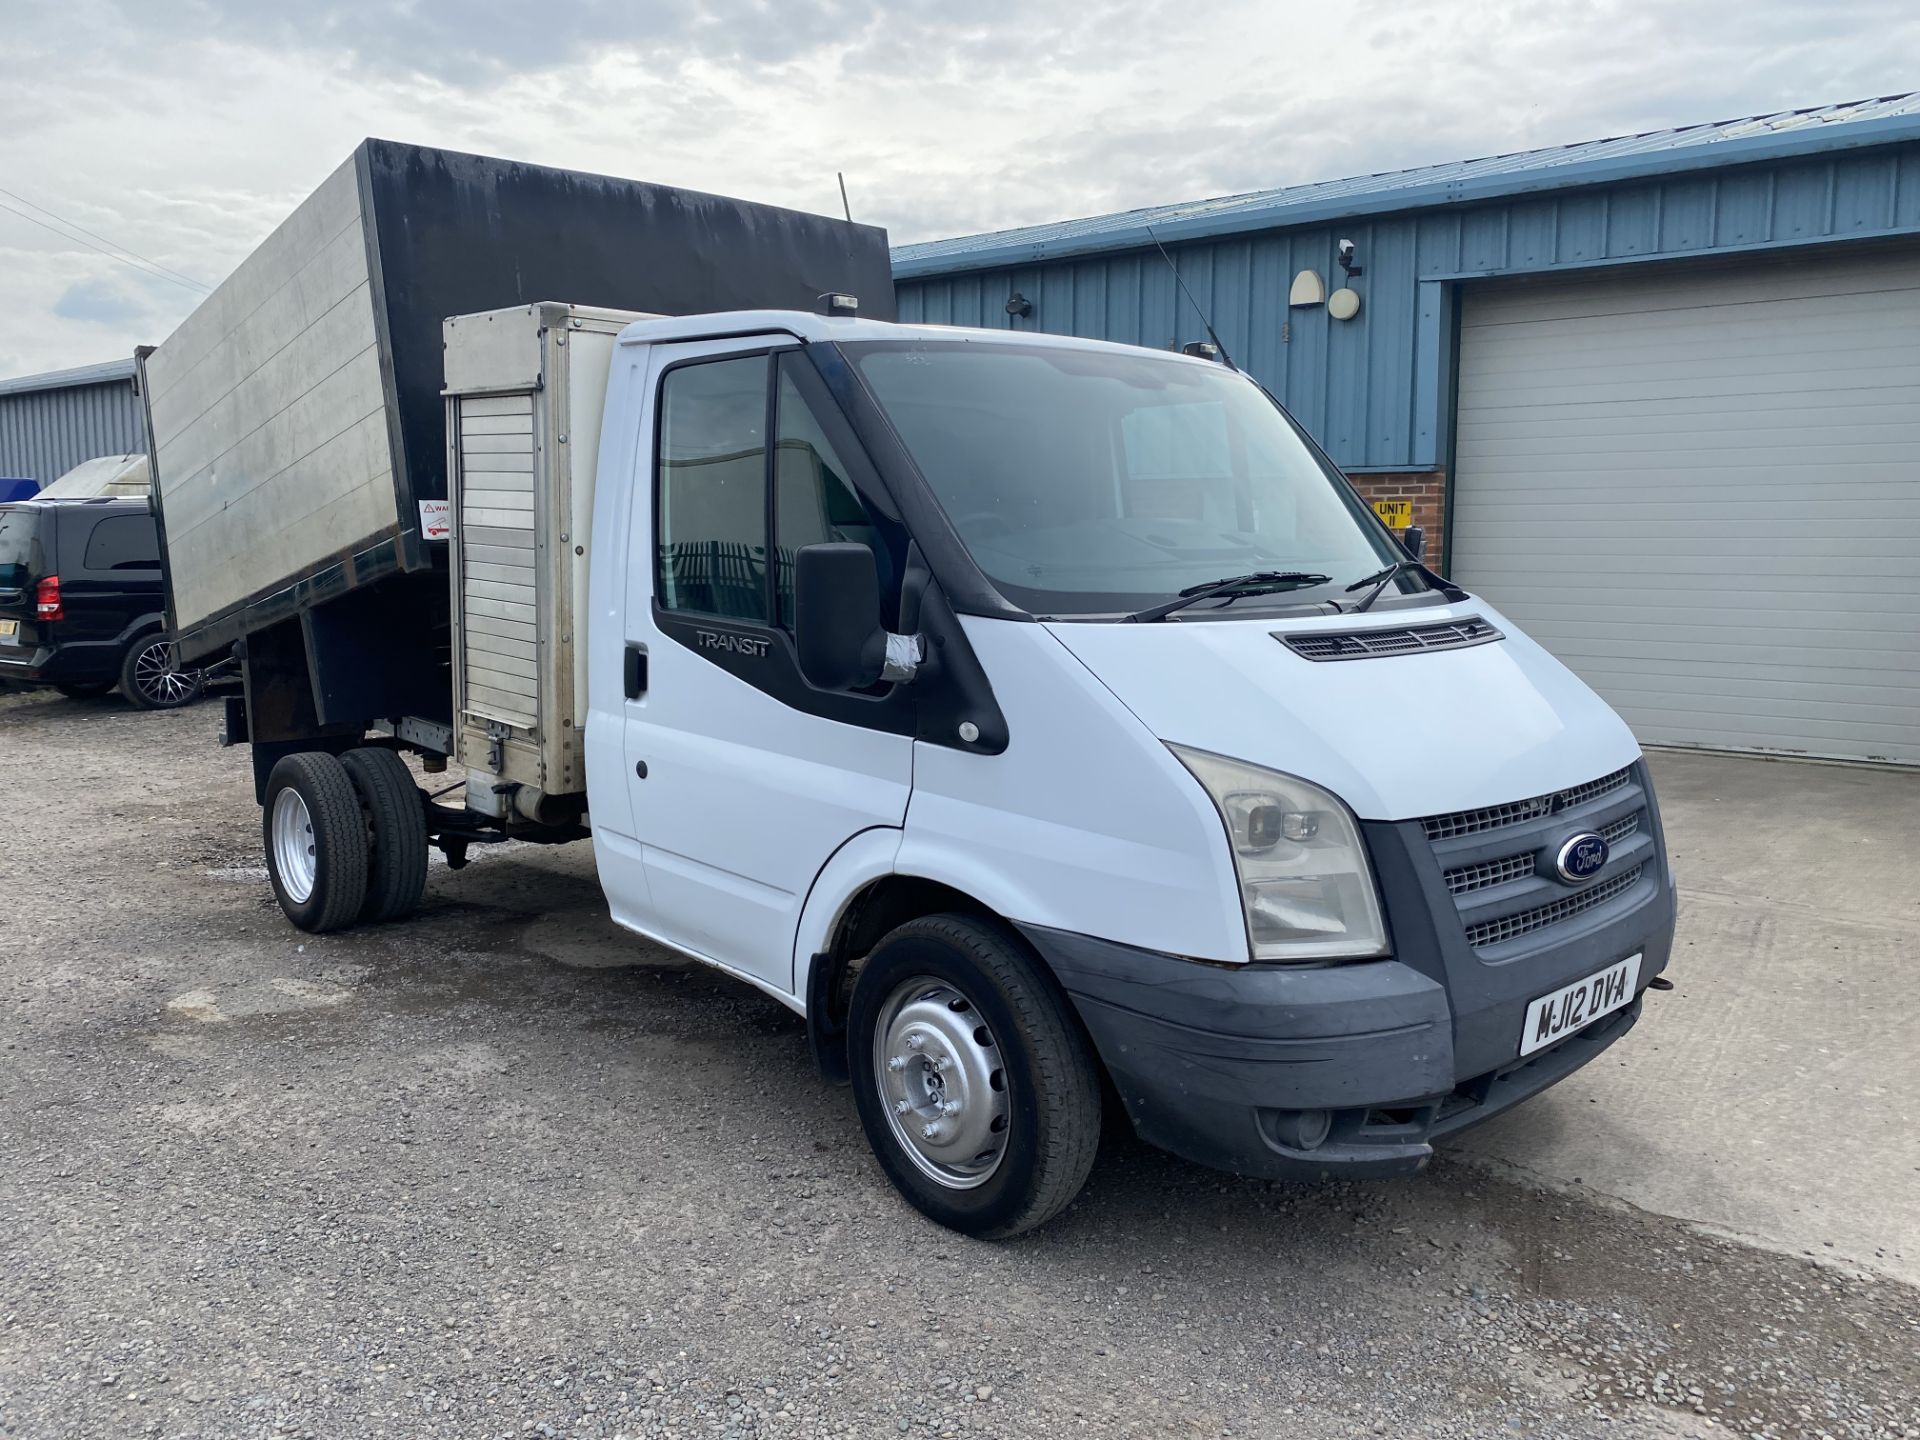 (Reserve Met) Ford Transit 2.2Tdci (125psi) T350 Tipper Truck -12 Reg - High Sides- Twin Rear Wheels - Image 2 of 15